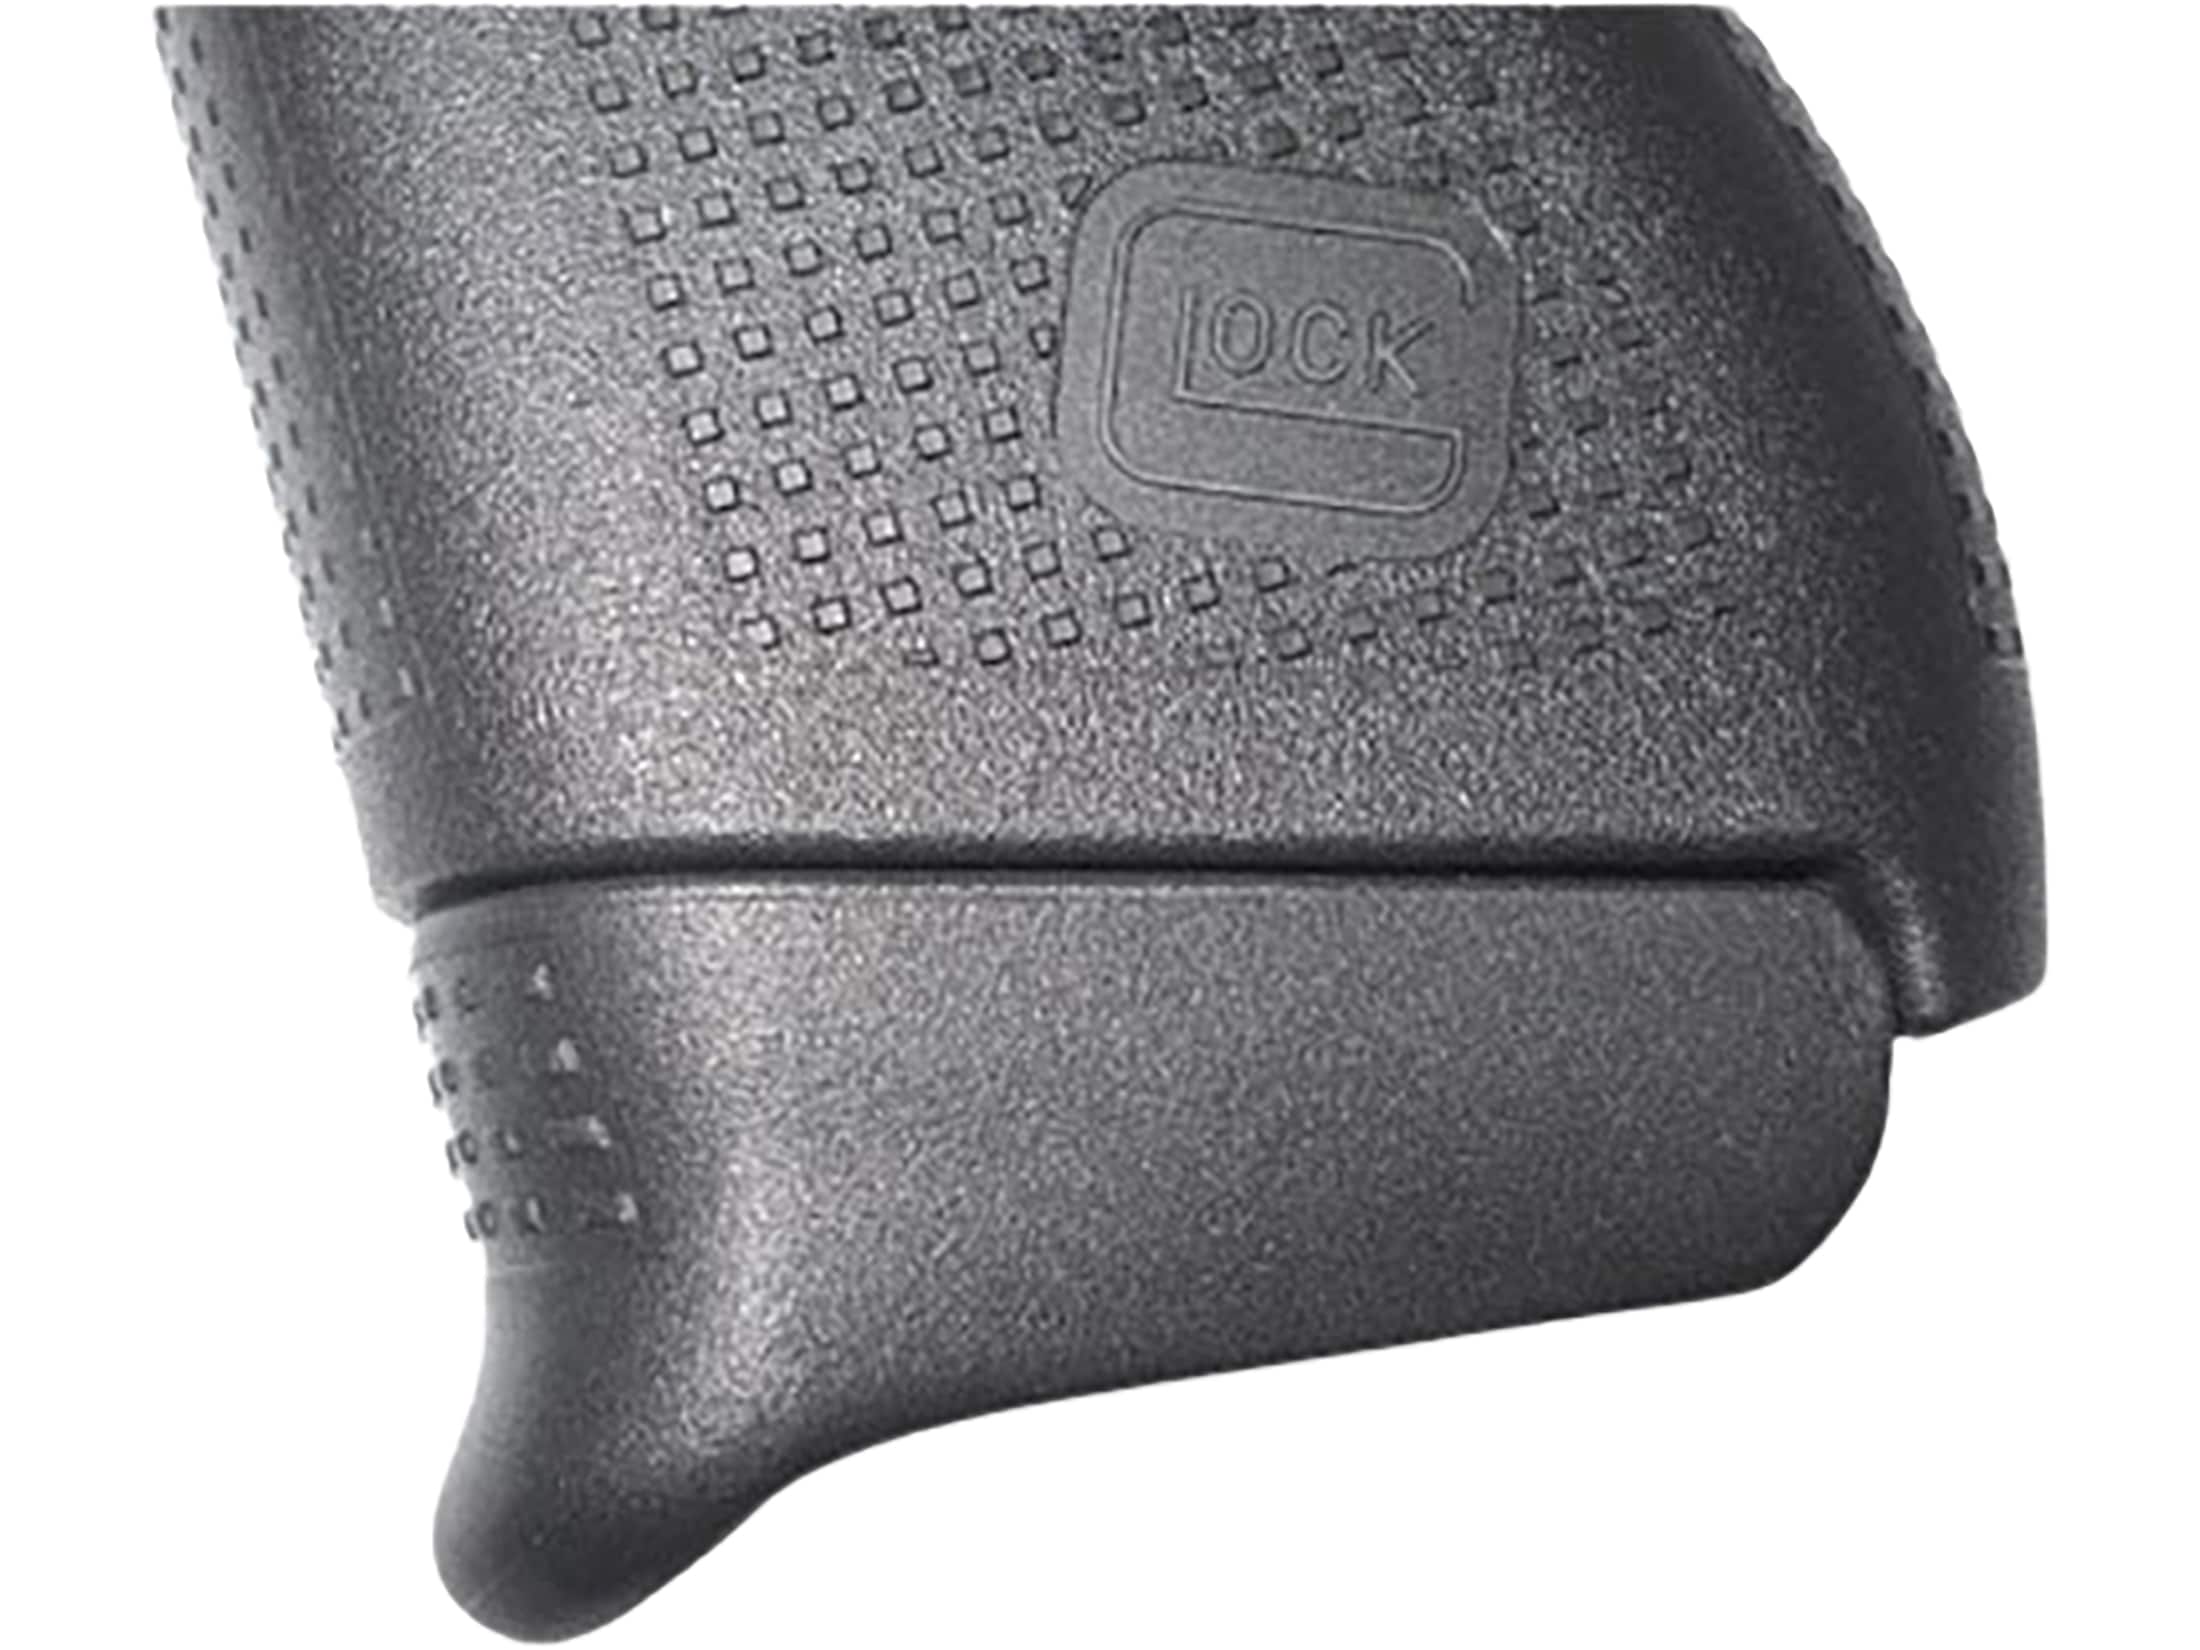 Plus 2 Tactical Magazine Base Pad Mag Grip Extension for GL 43 Plus 1 